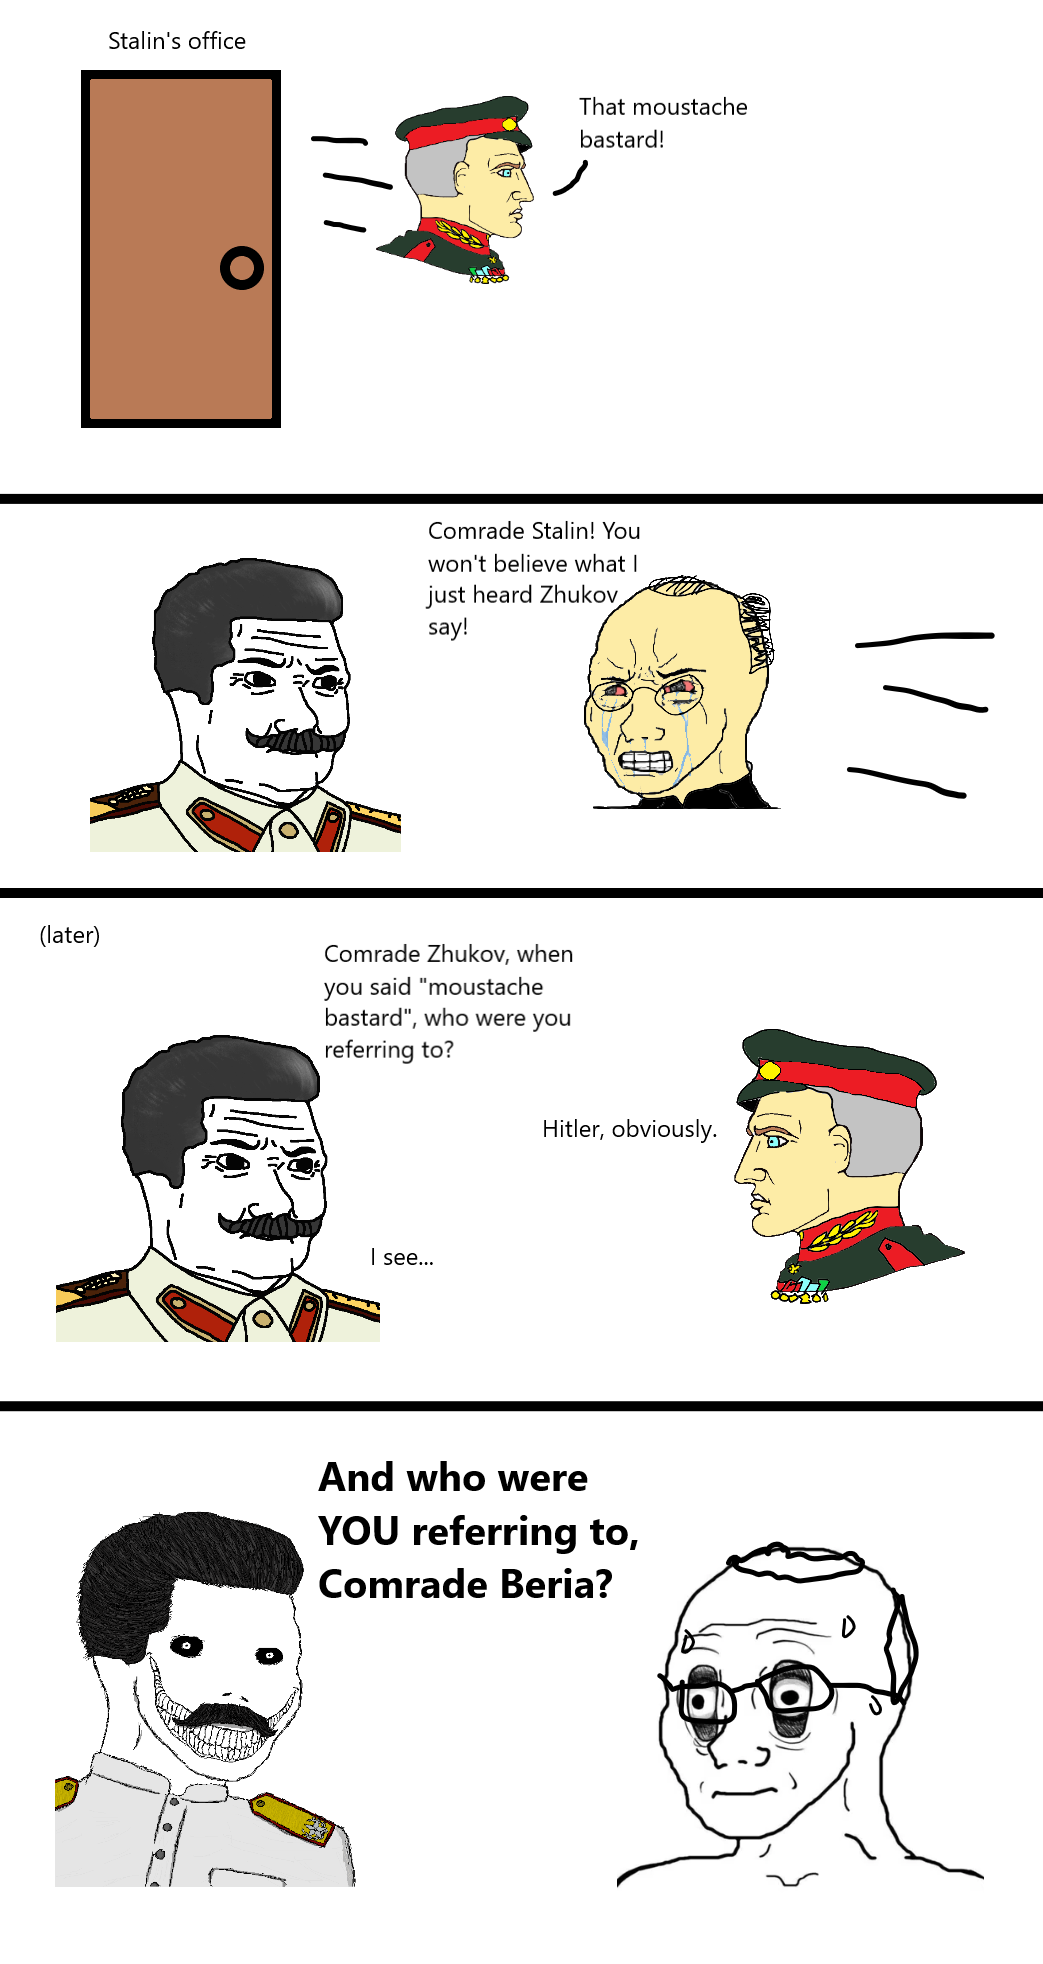 Zhukov, Stalin and Beria (not a real dialogue, but Zhukov was indeed a Chad)